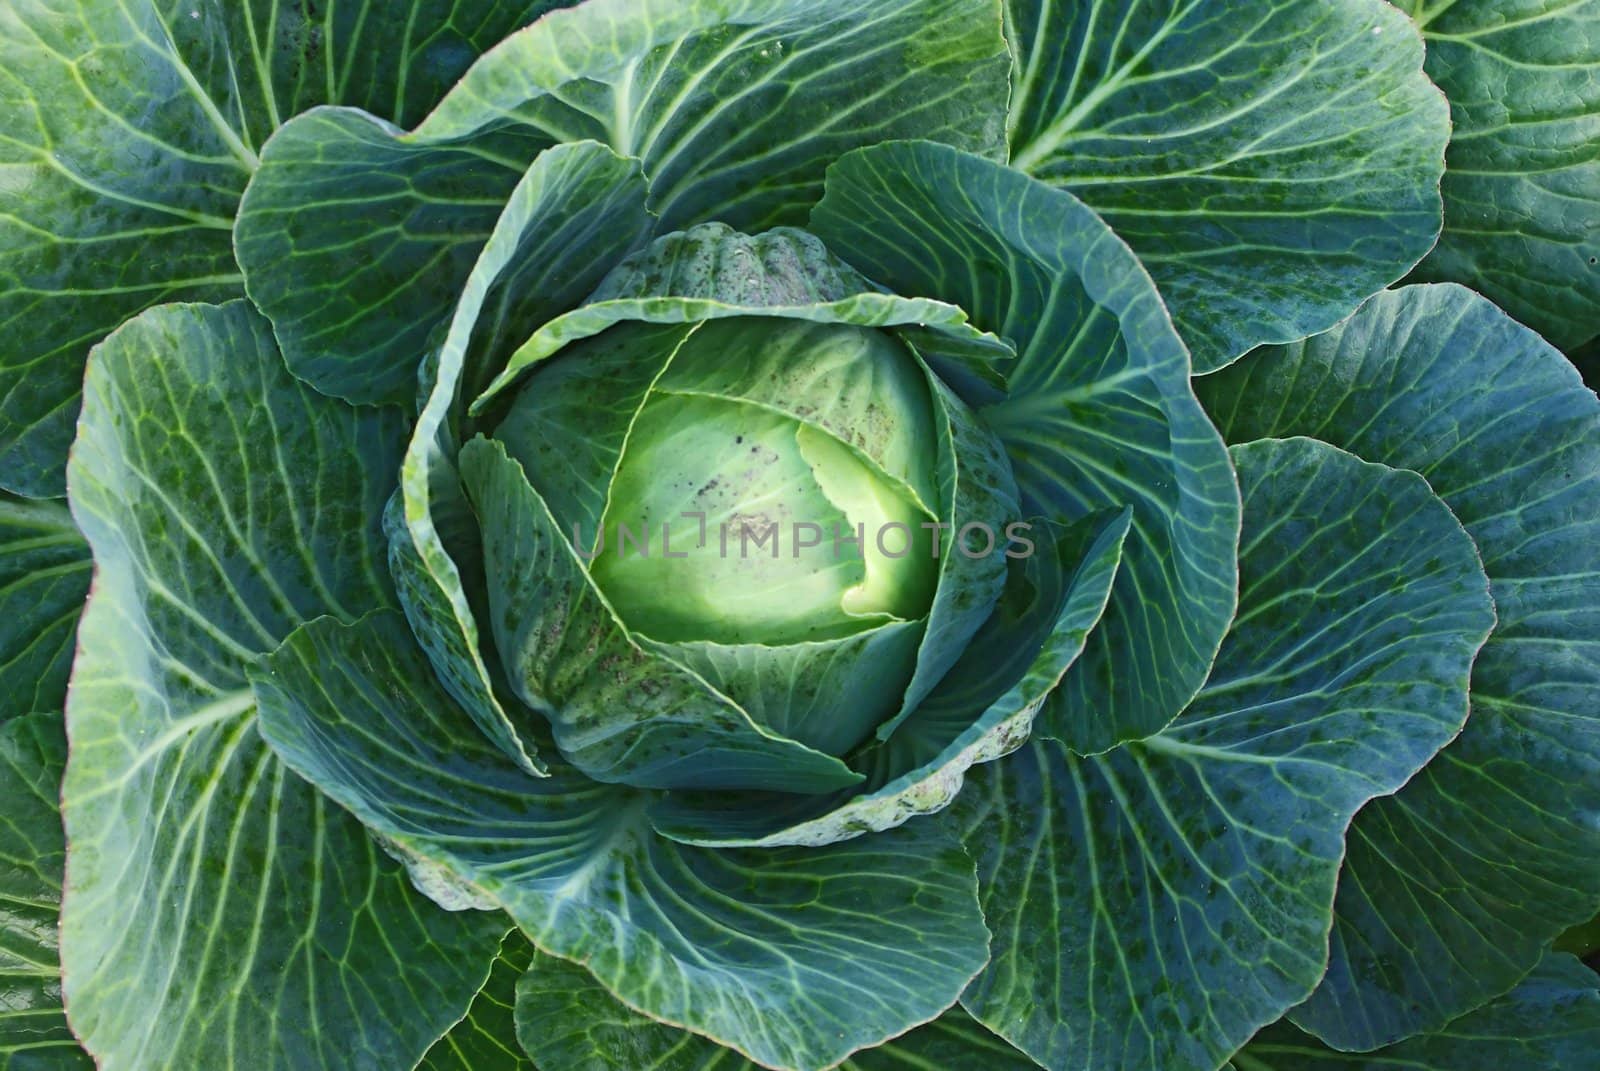 Cabbage by Vitamin